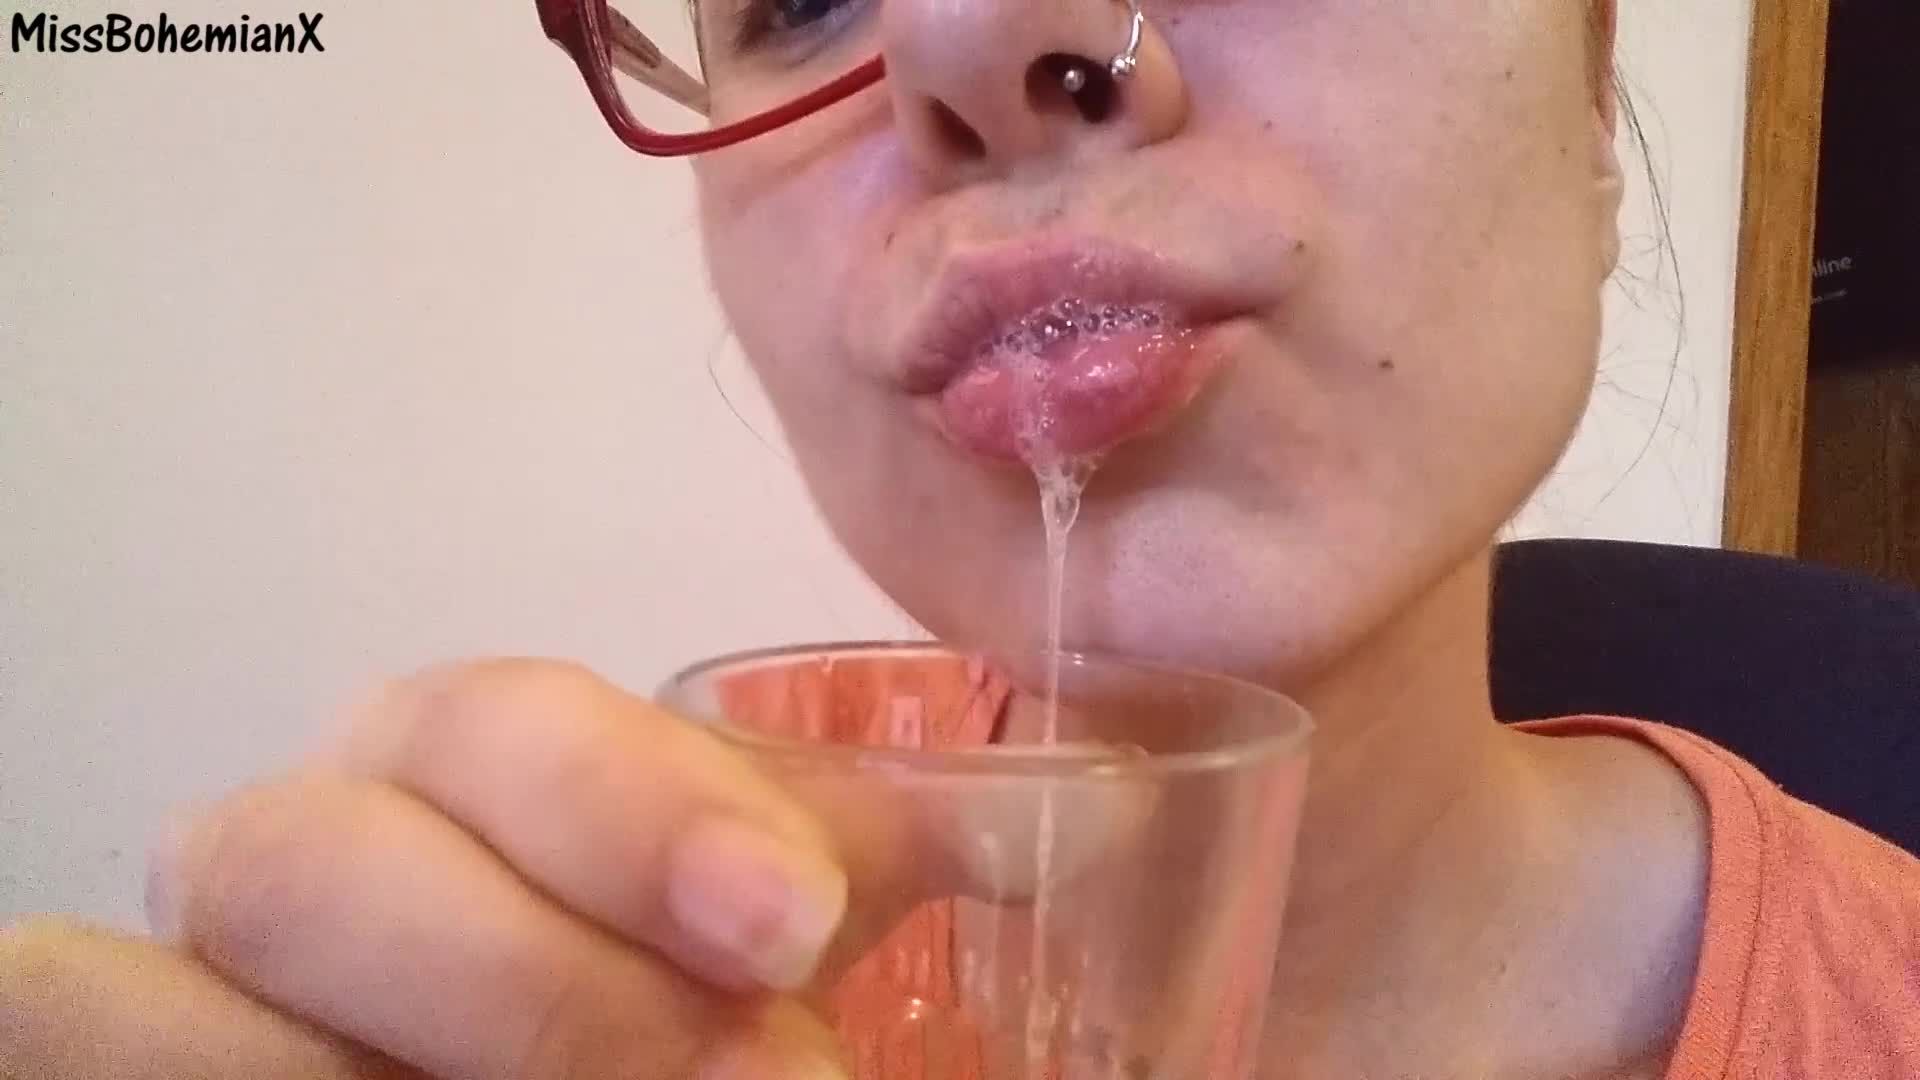 Drooling in a Shot Glass - Spit Fetish